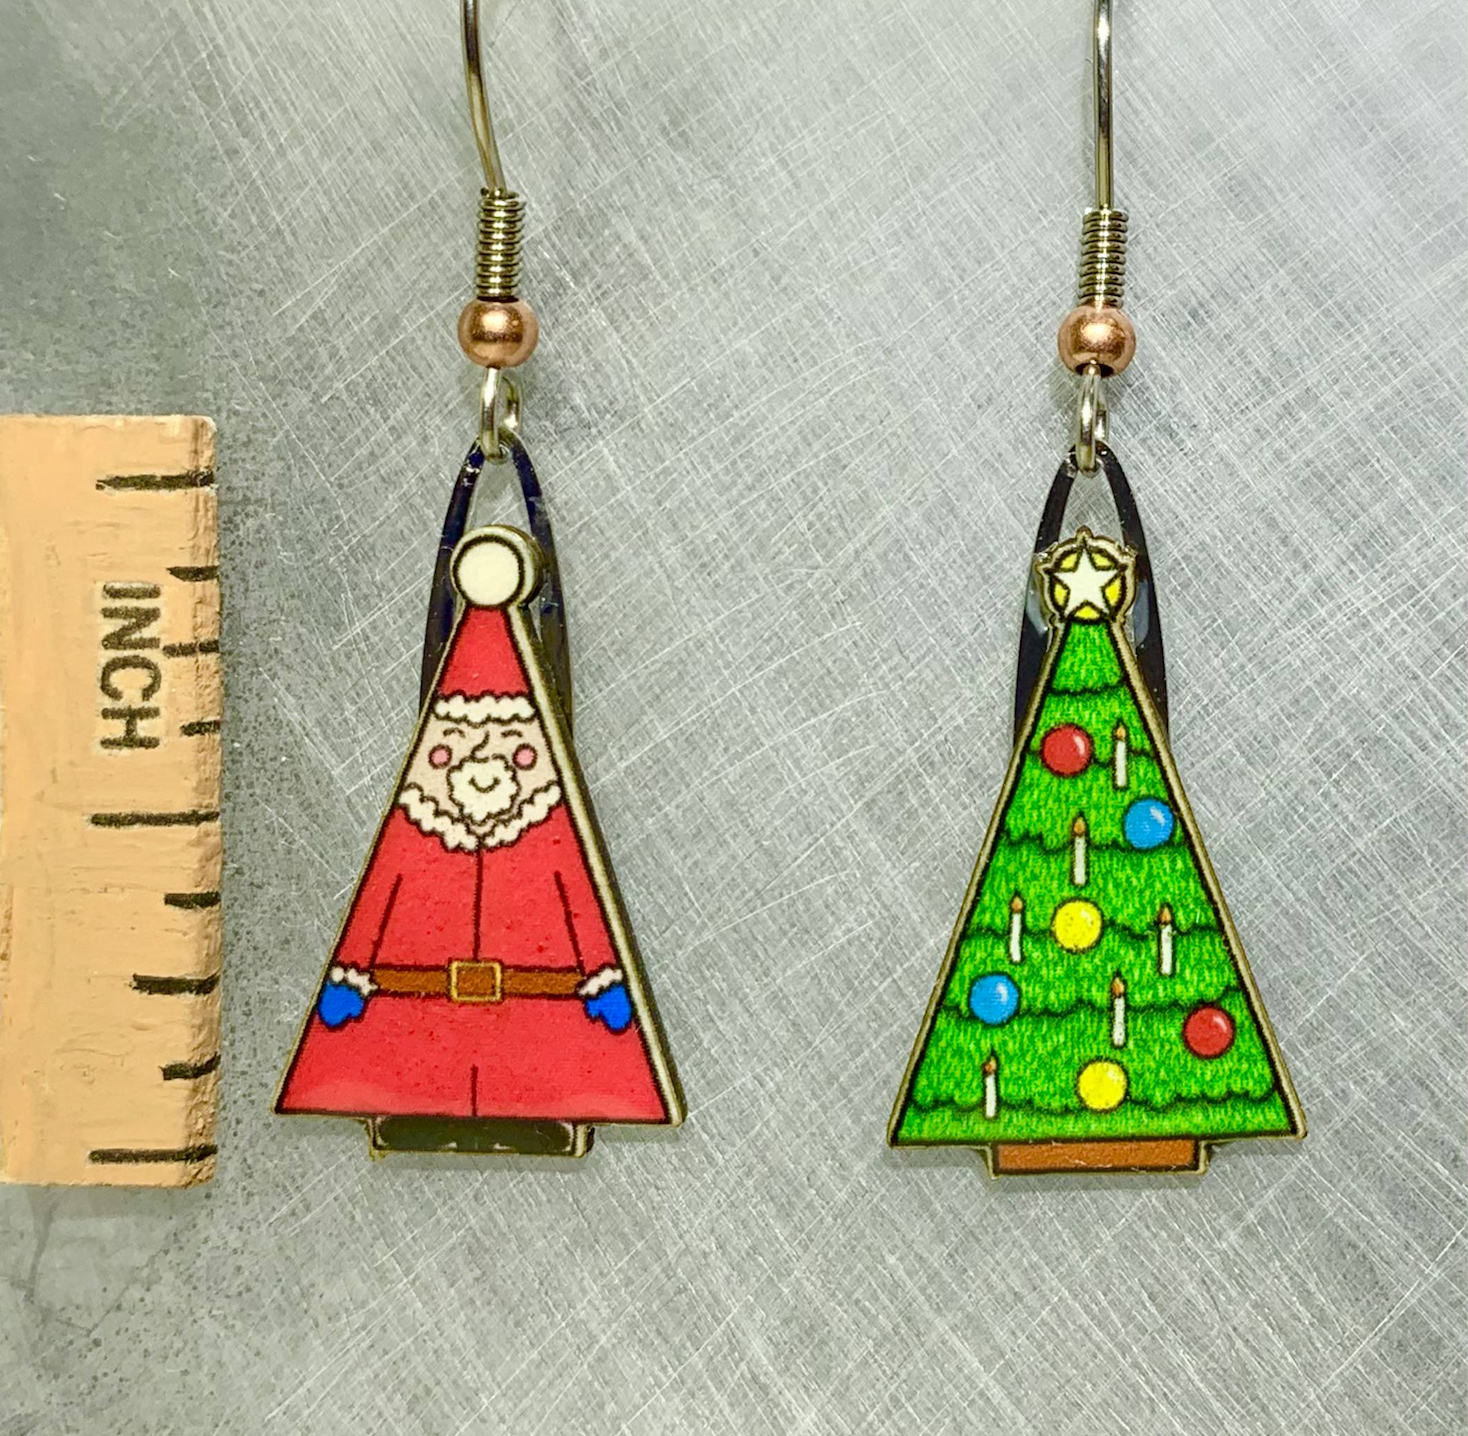 Picture shown is of 1 inch tall pair of earrings of Santa & Tree.